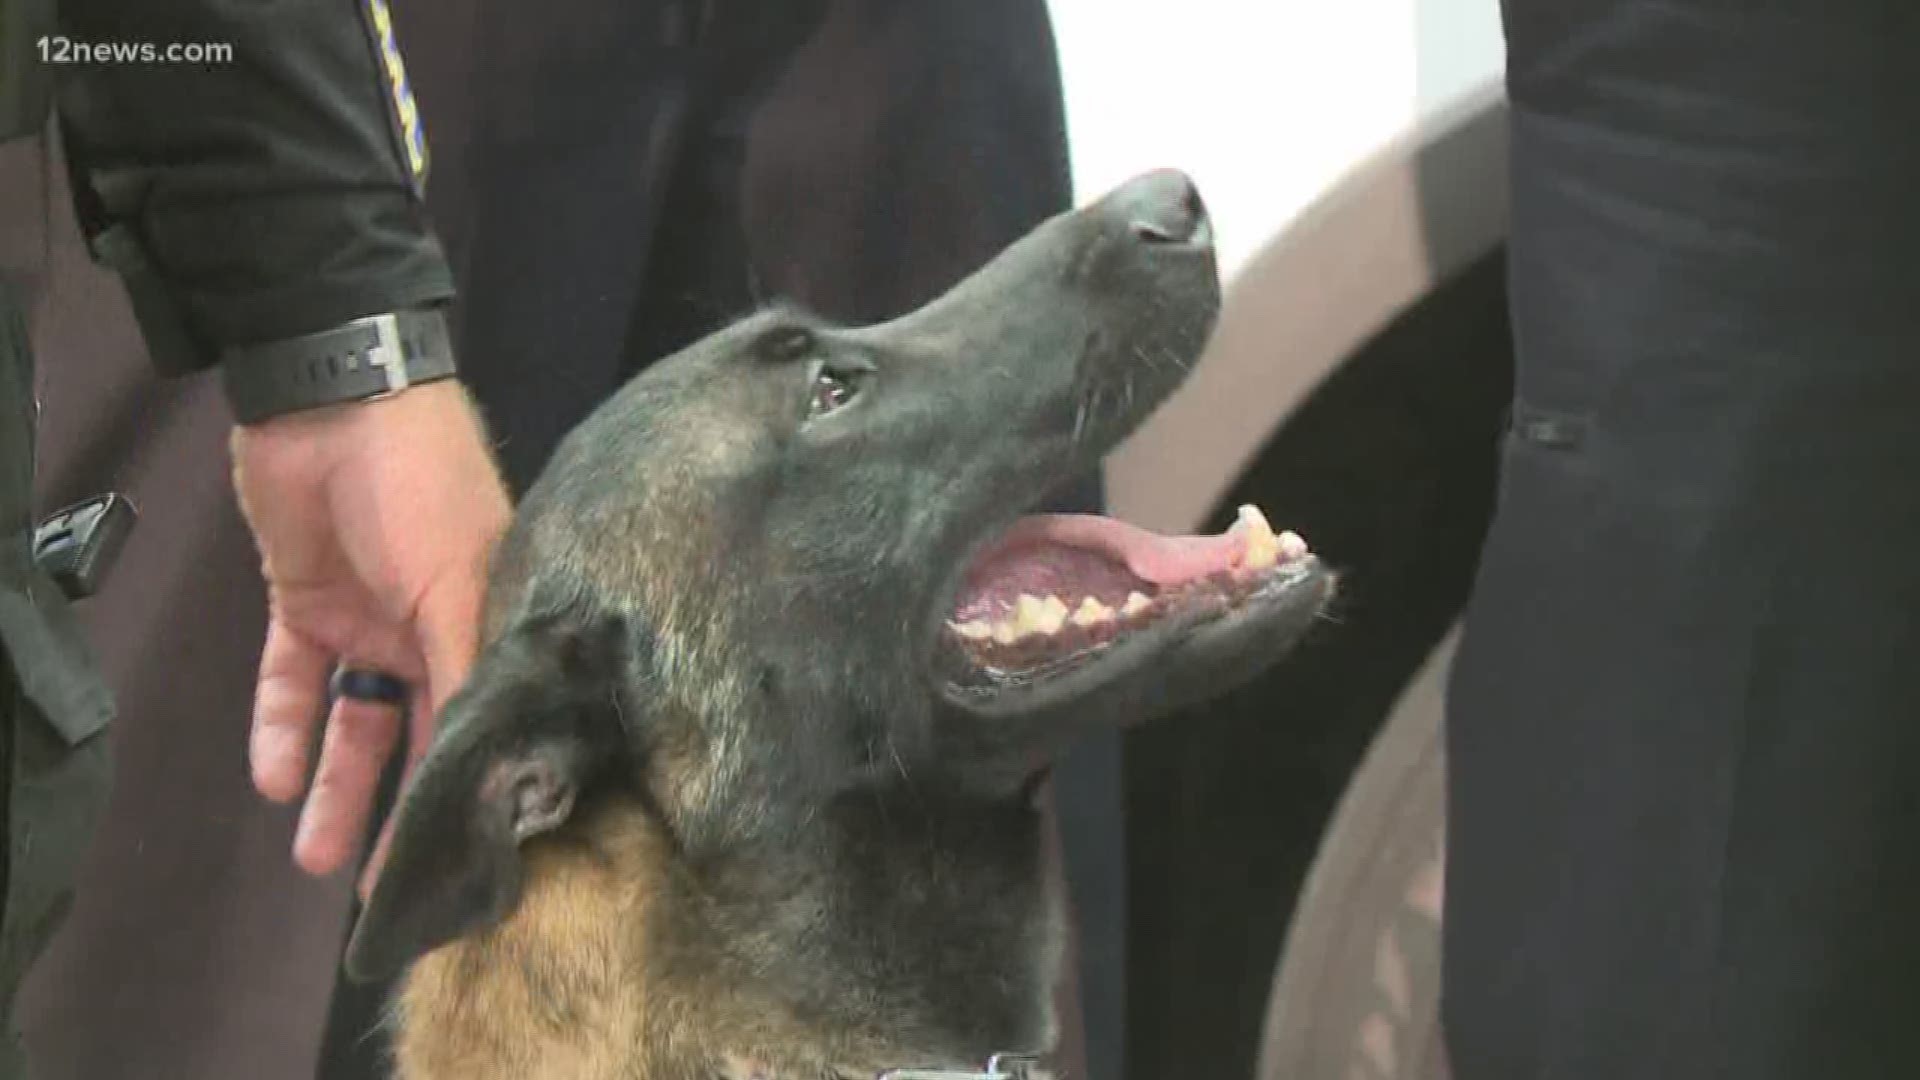 The dogs are trained to detect illegal drugs and humans at ports of entry.